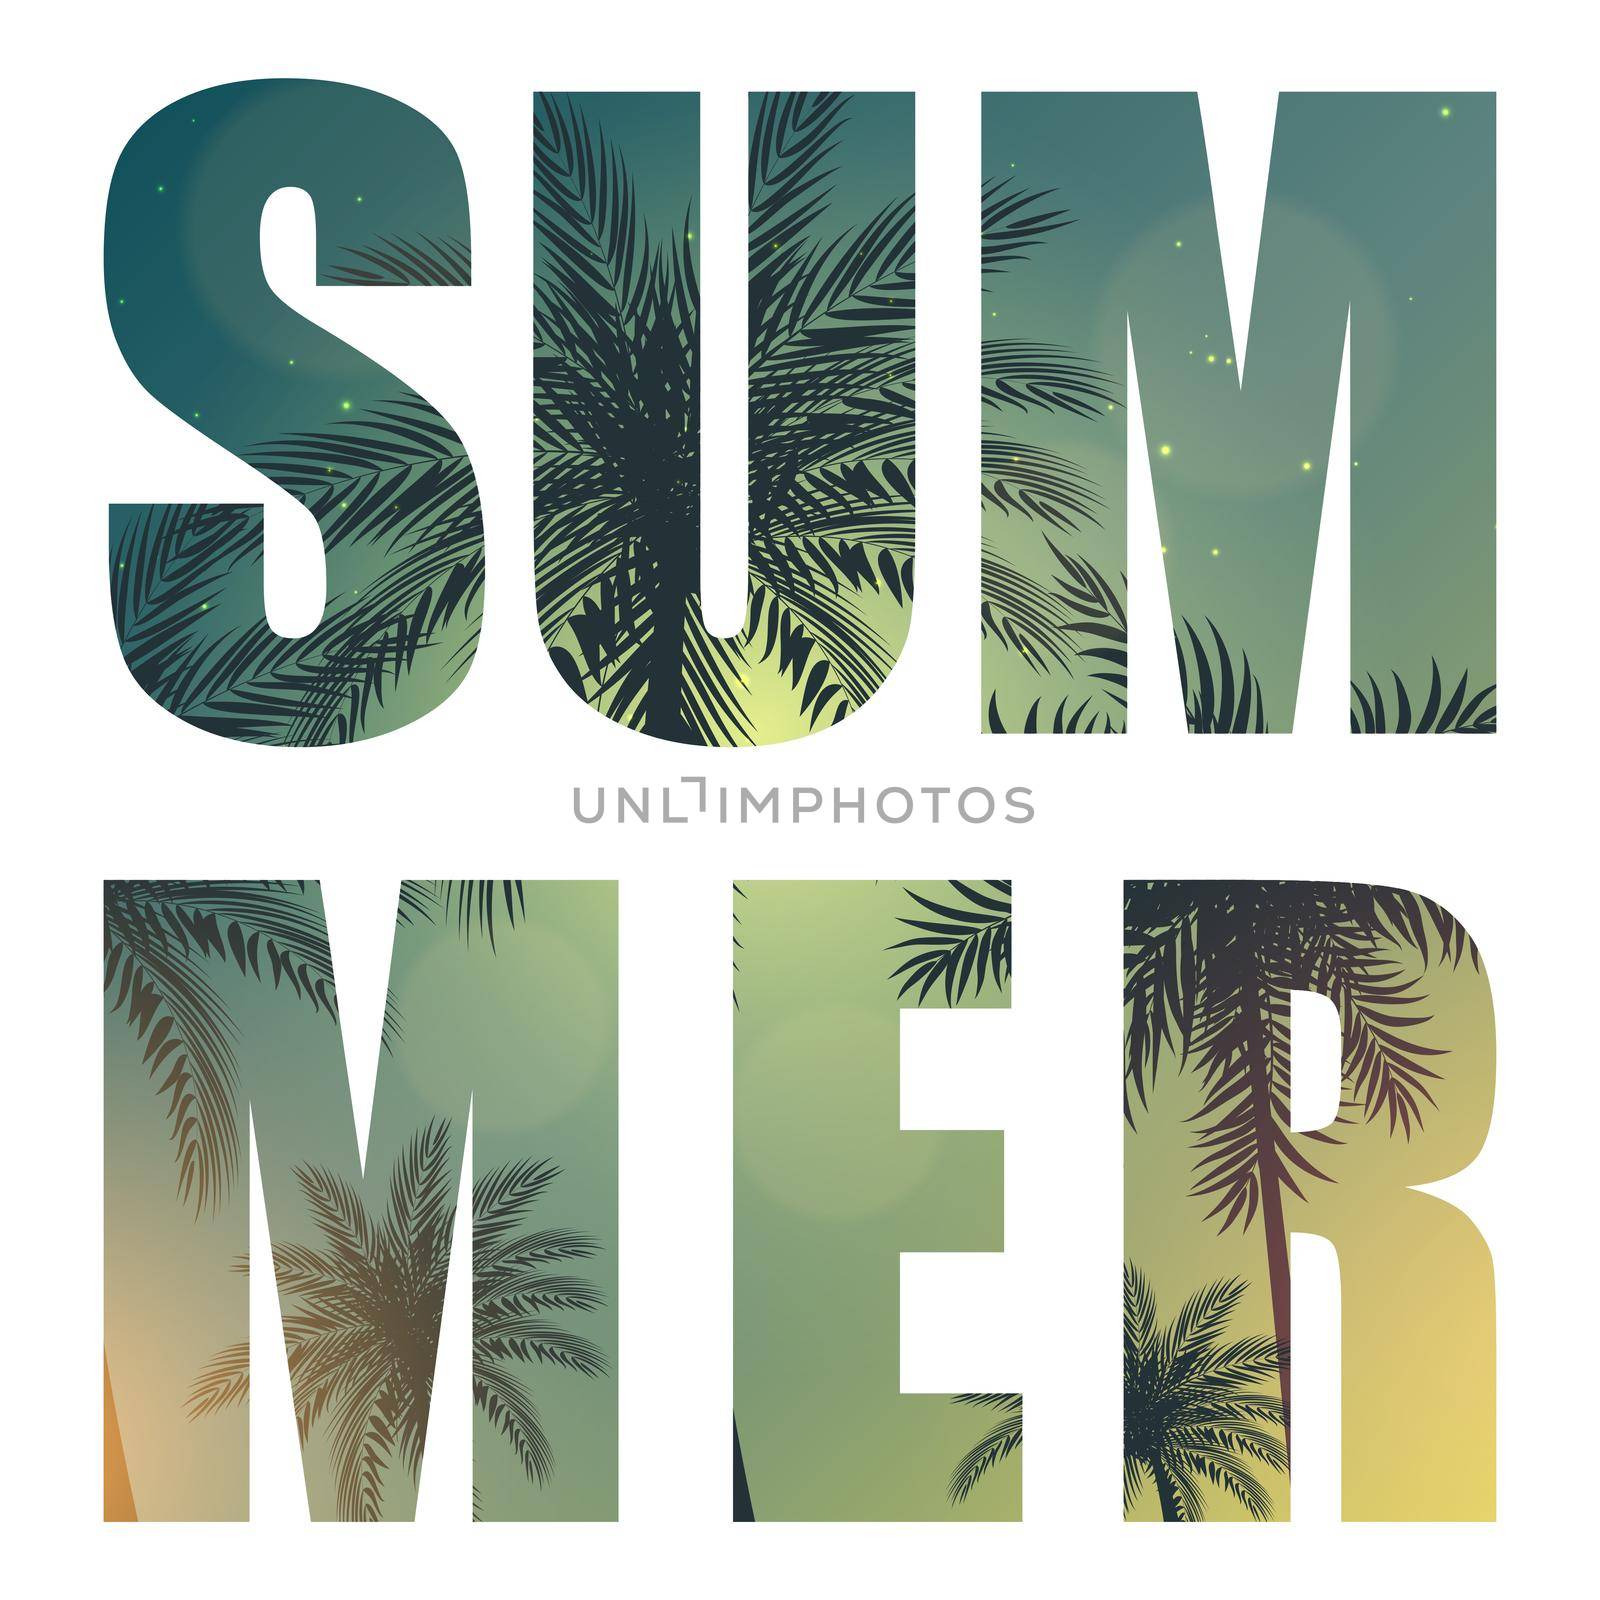 Summer Word from Beautifil Palm Tree Leaf Silhouette Background Vector Illustration by yganko